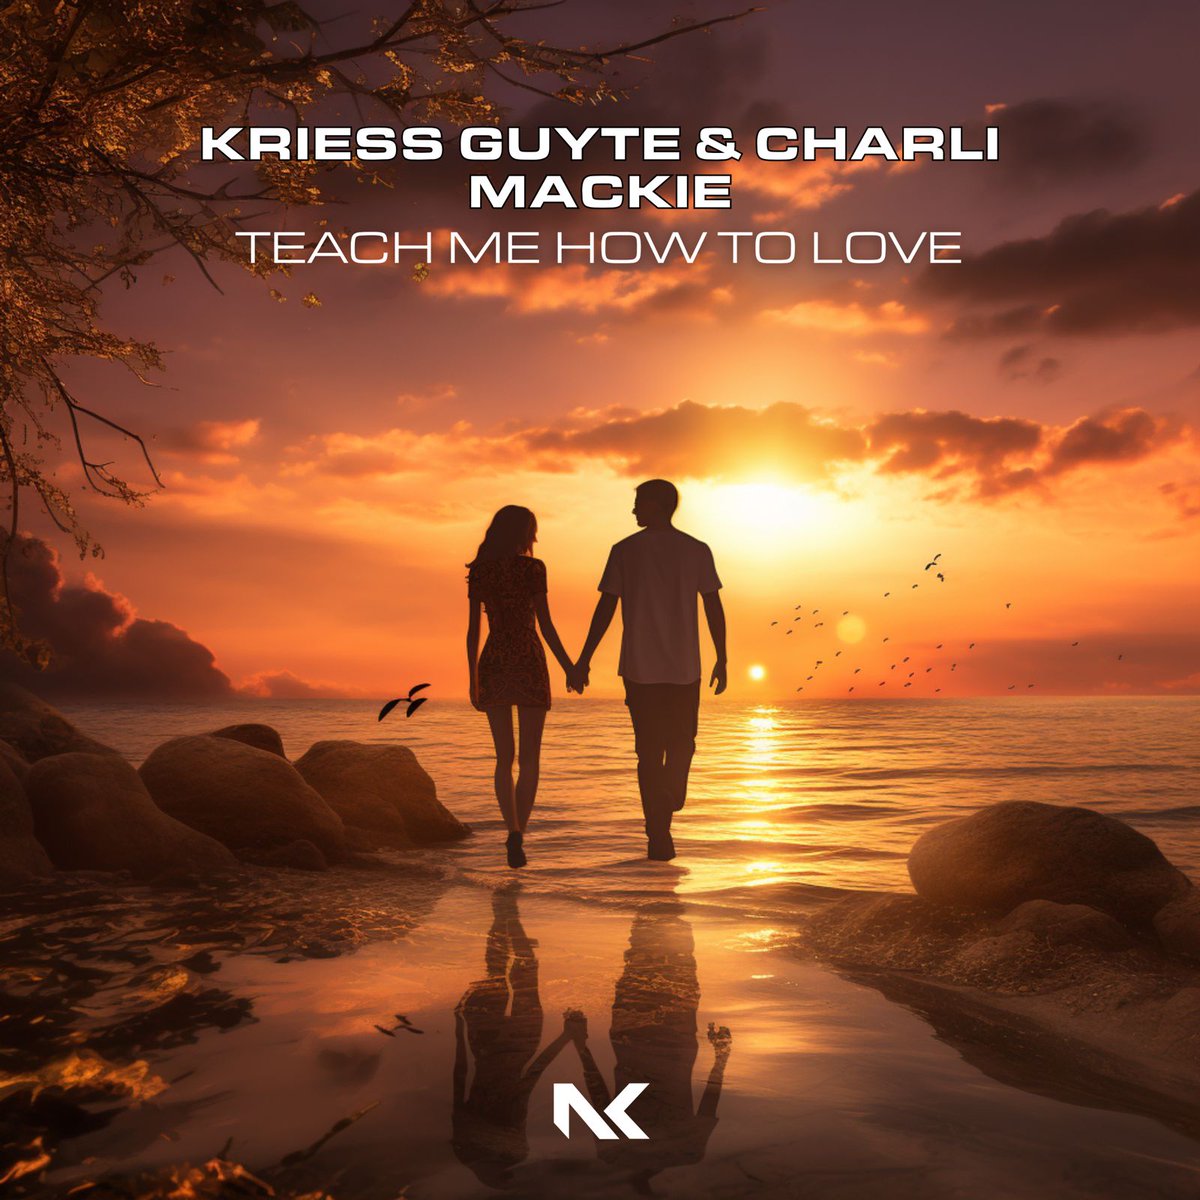 These releases are now available to pre-save on our music platforms! Nico Cranxx - Gawat fusion.complete.me/gawat Kriess Guyte & Charli Mackie - Teach me how to love nk.complete.me/teachmehowtolo… Release date: 26.02.24 #Nocturnalknights #newmusic #presave